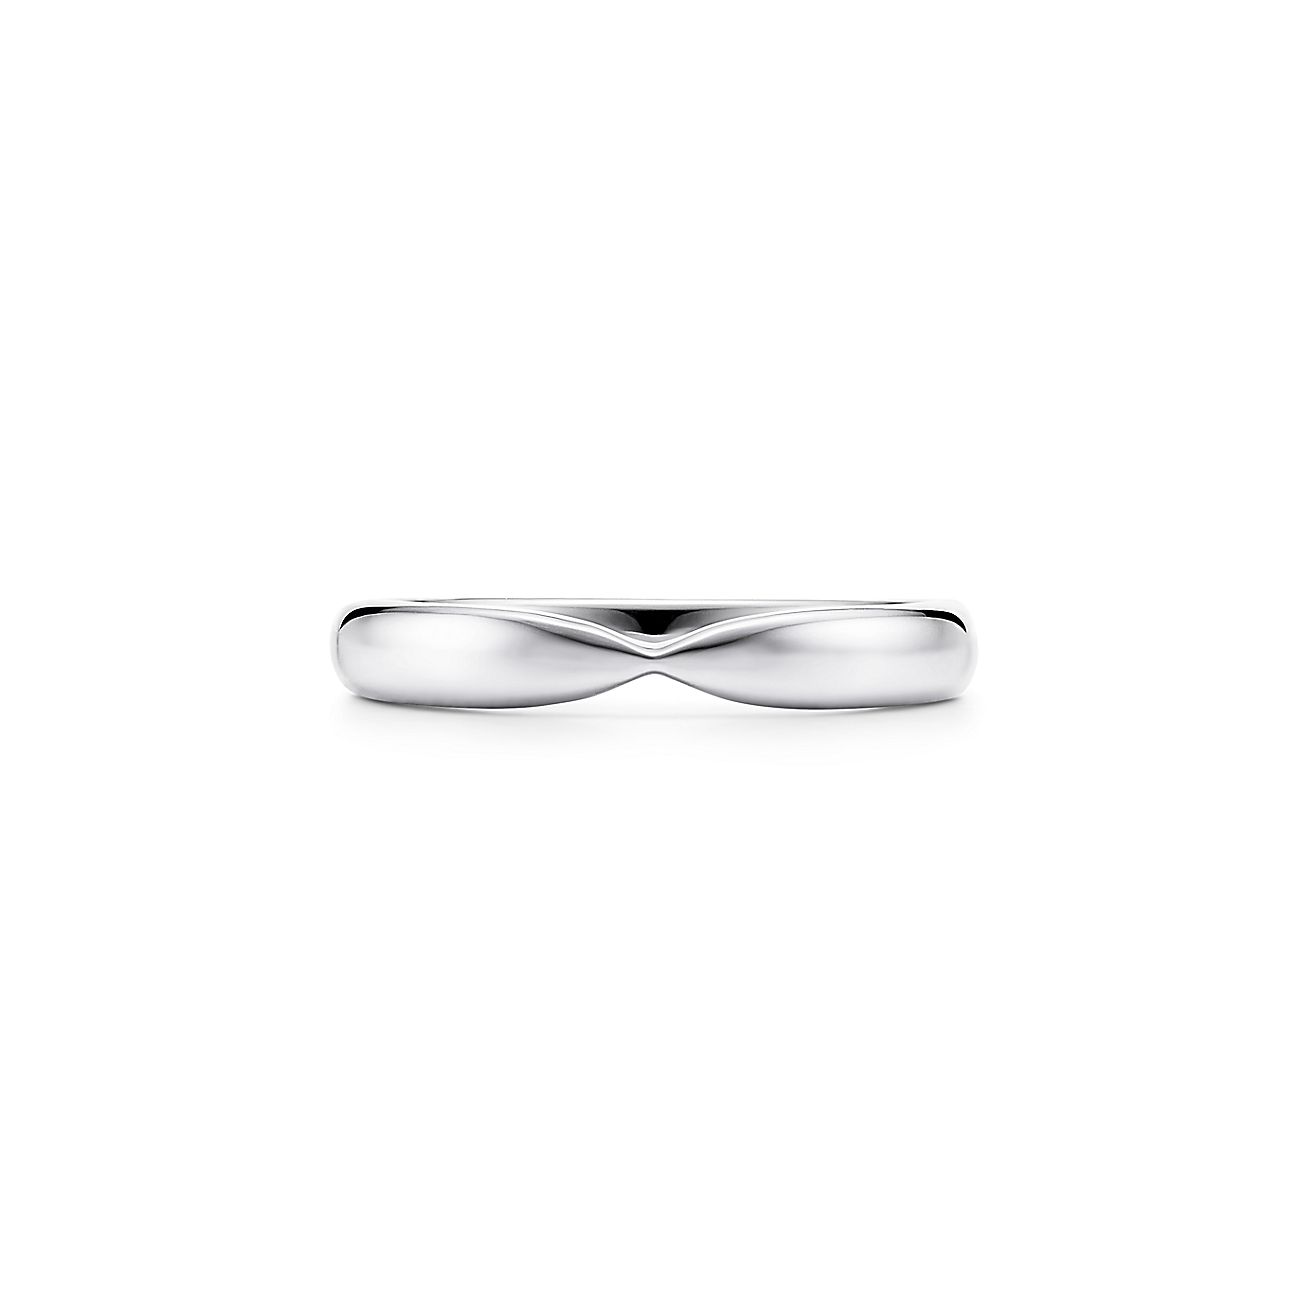 Tiffany Forever Wedding Band Ring in Yellow Gold, 3 mm Wide